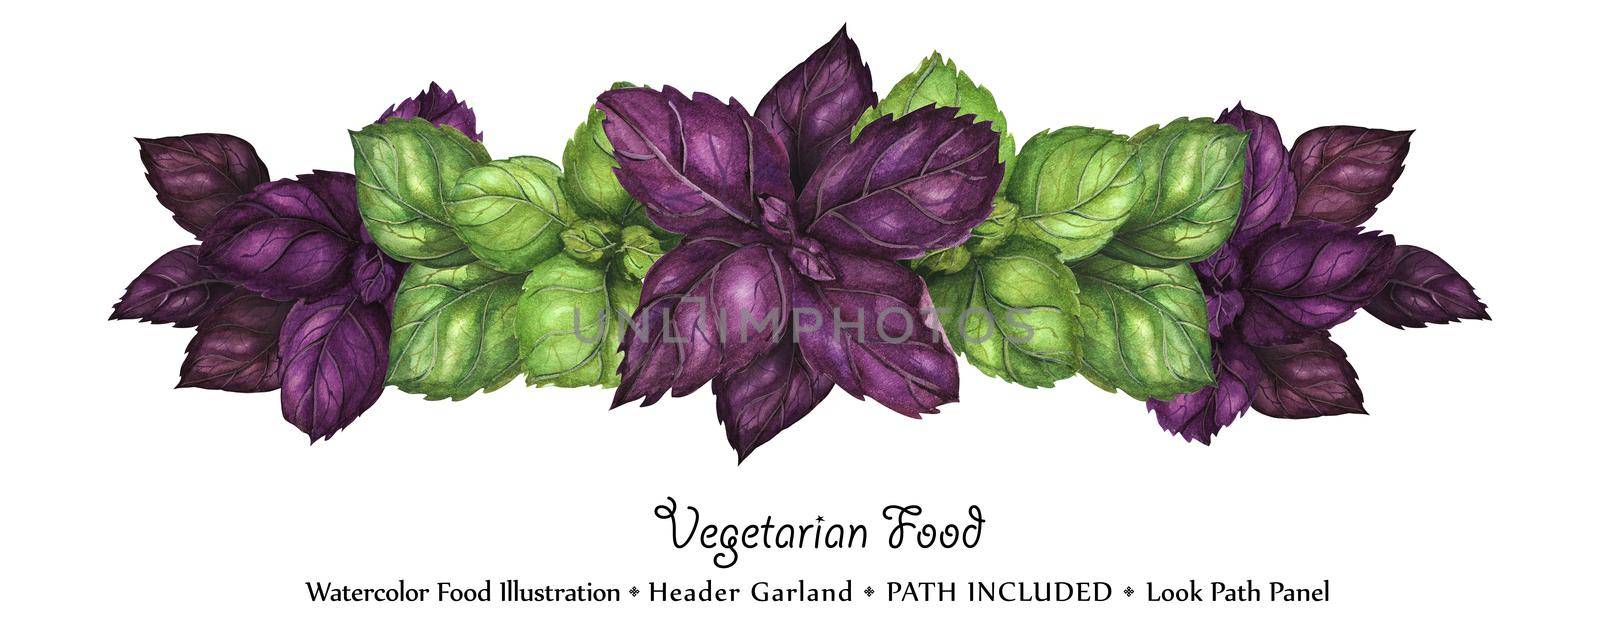 Watercolor vegan headline garland by freshness green and purple basil leaves. Isolated, clipping path included, vegan design